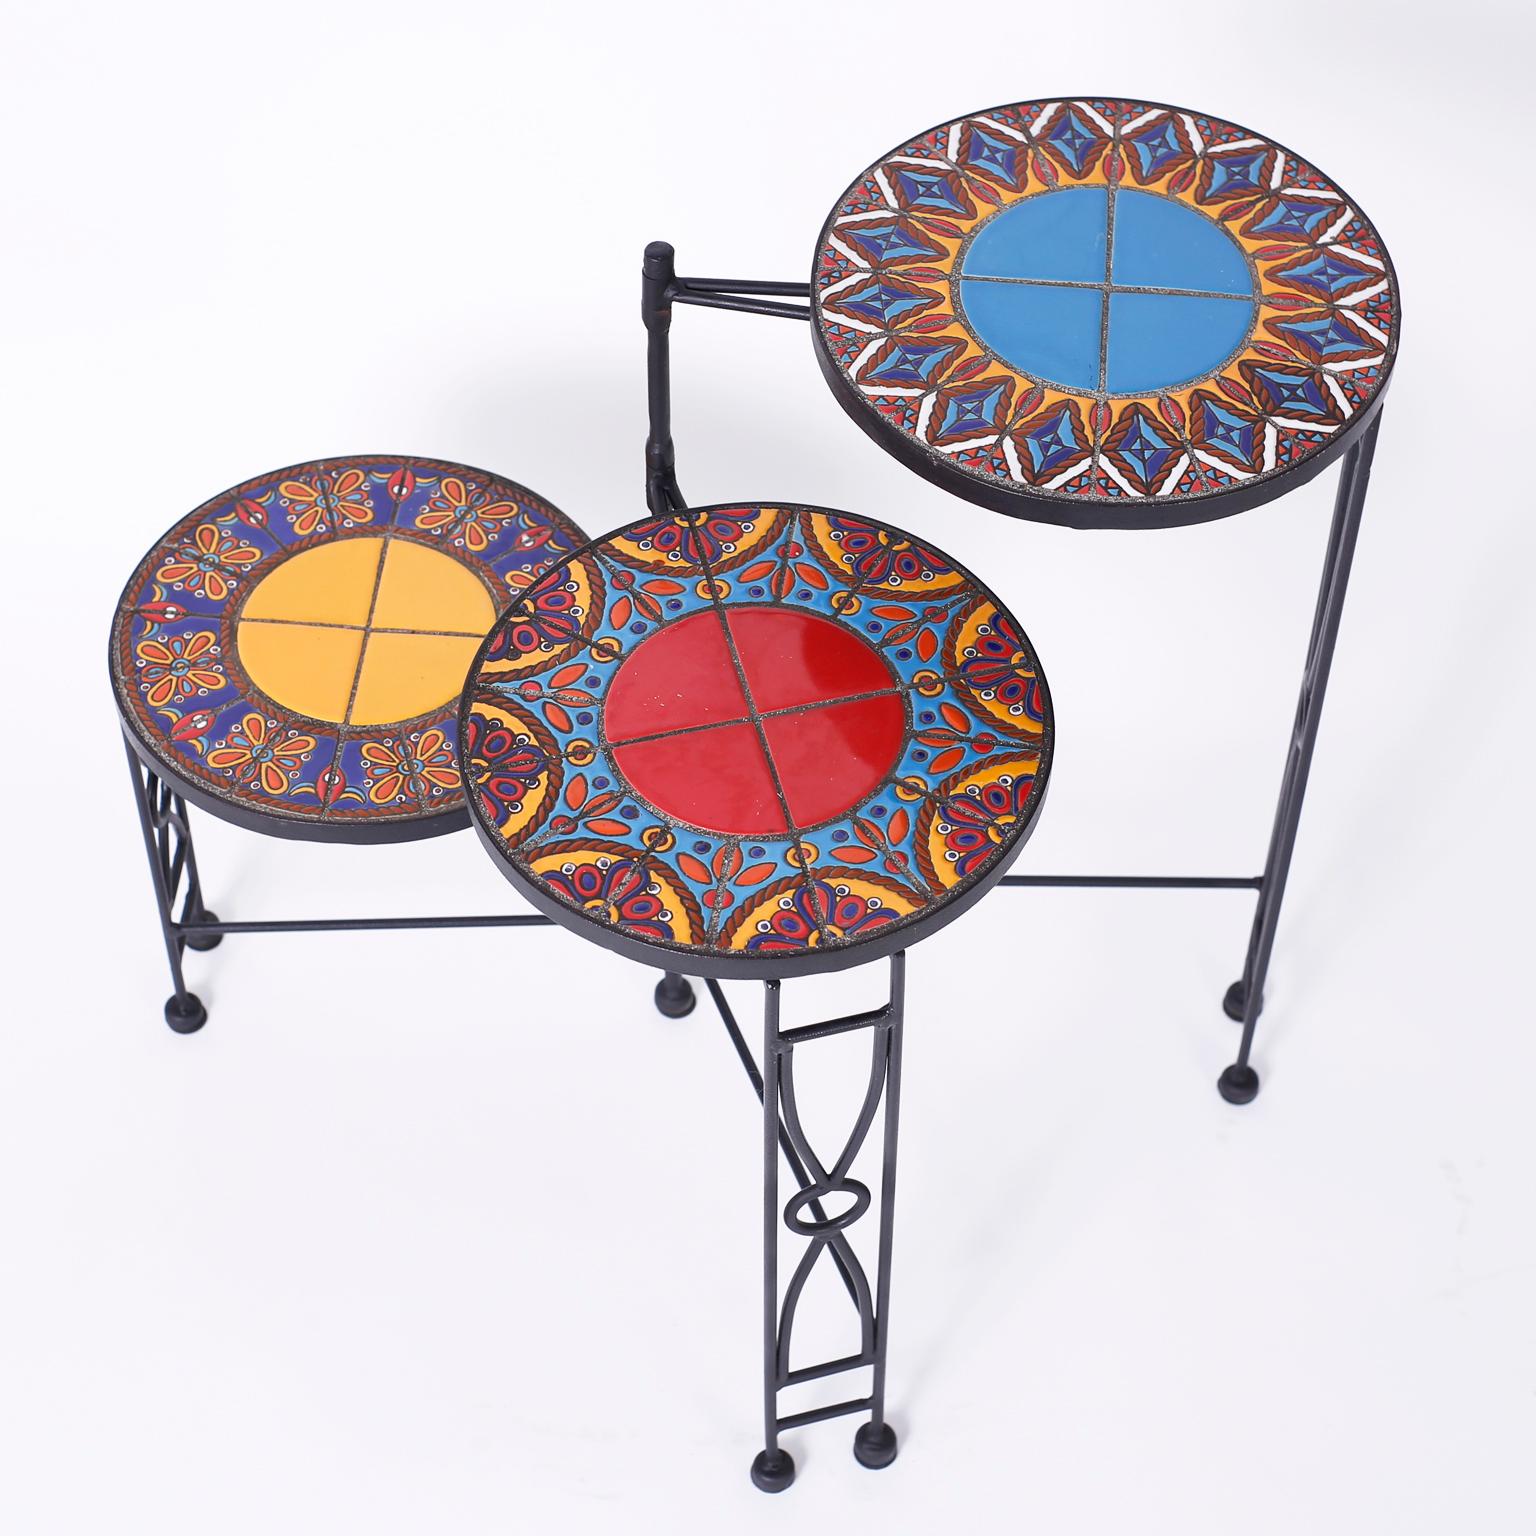 Midcentury adjustable three-tiered plant stand with an iron base and featuring bold colorful kaleidoscopic tile tops with floral and geometric designs.

Closed depth 12